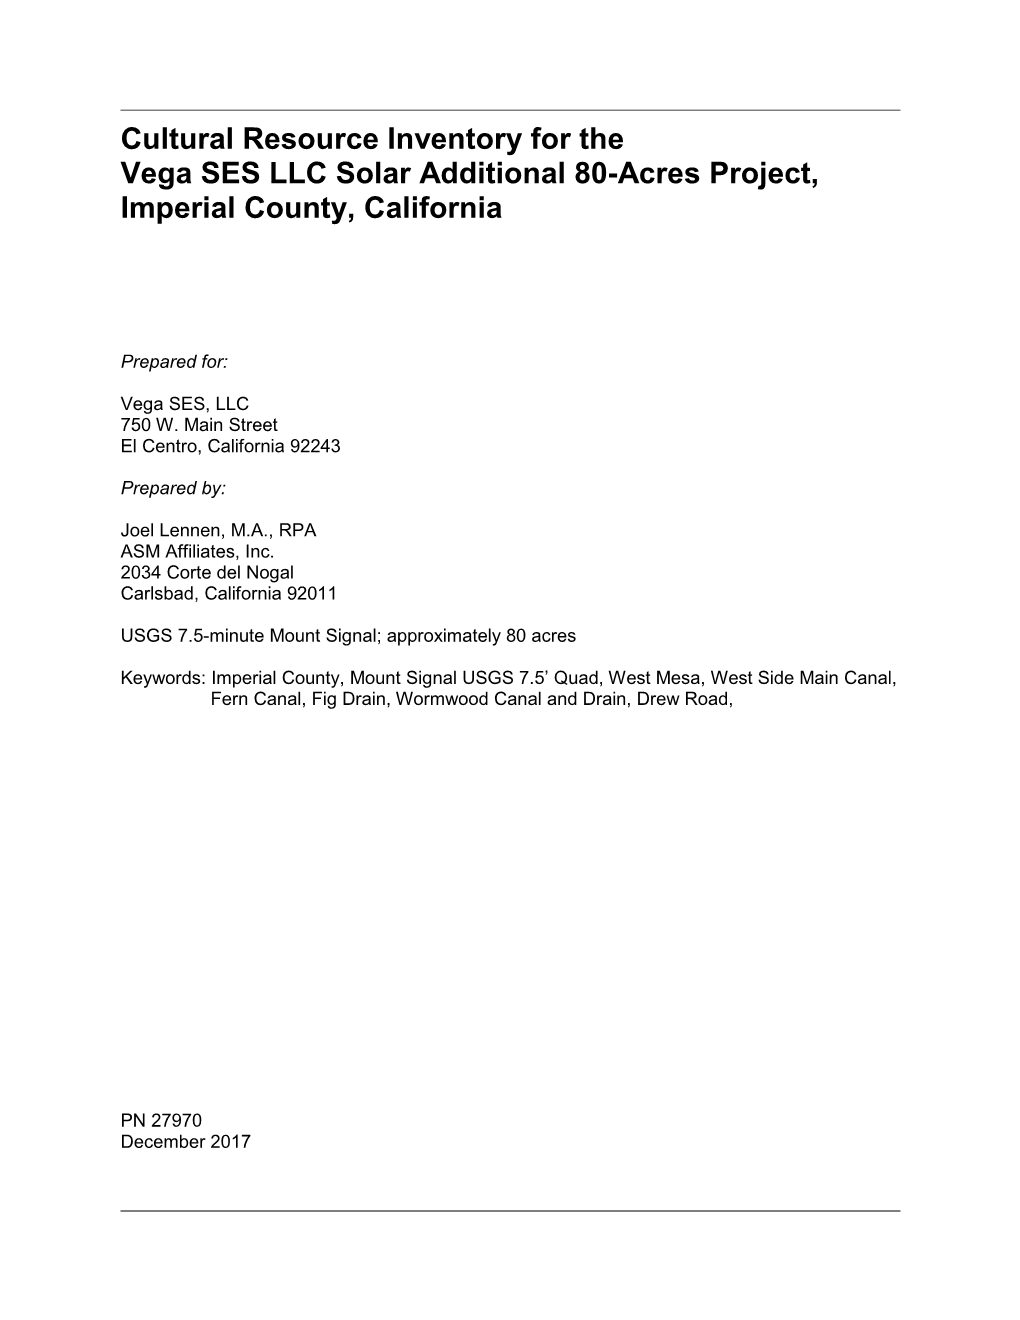 Cultural Resource Inventory for the Vega SES LLC Solar Additional 80-Acres Project, Imperial County, California